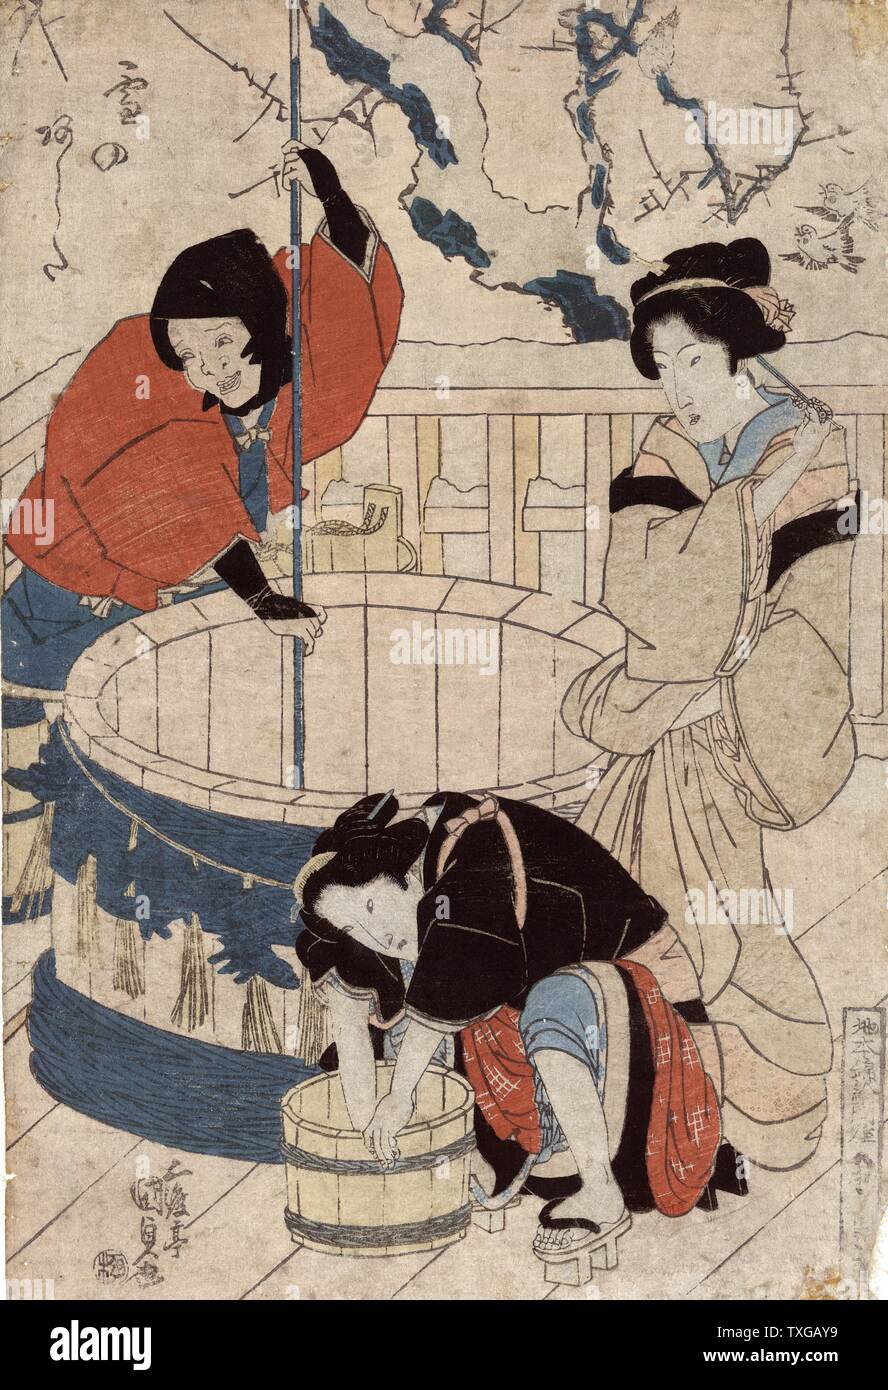 Tomorrow's snow. Print shows an upper class woman standing near a well and two women, possibly servants, getting water at the well. Stock Photo